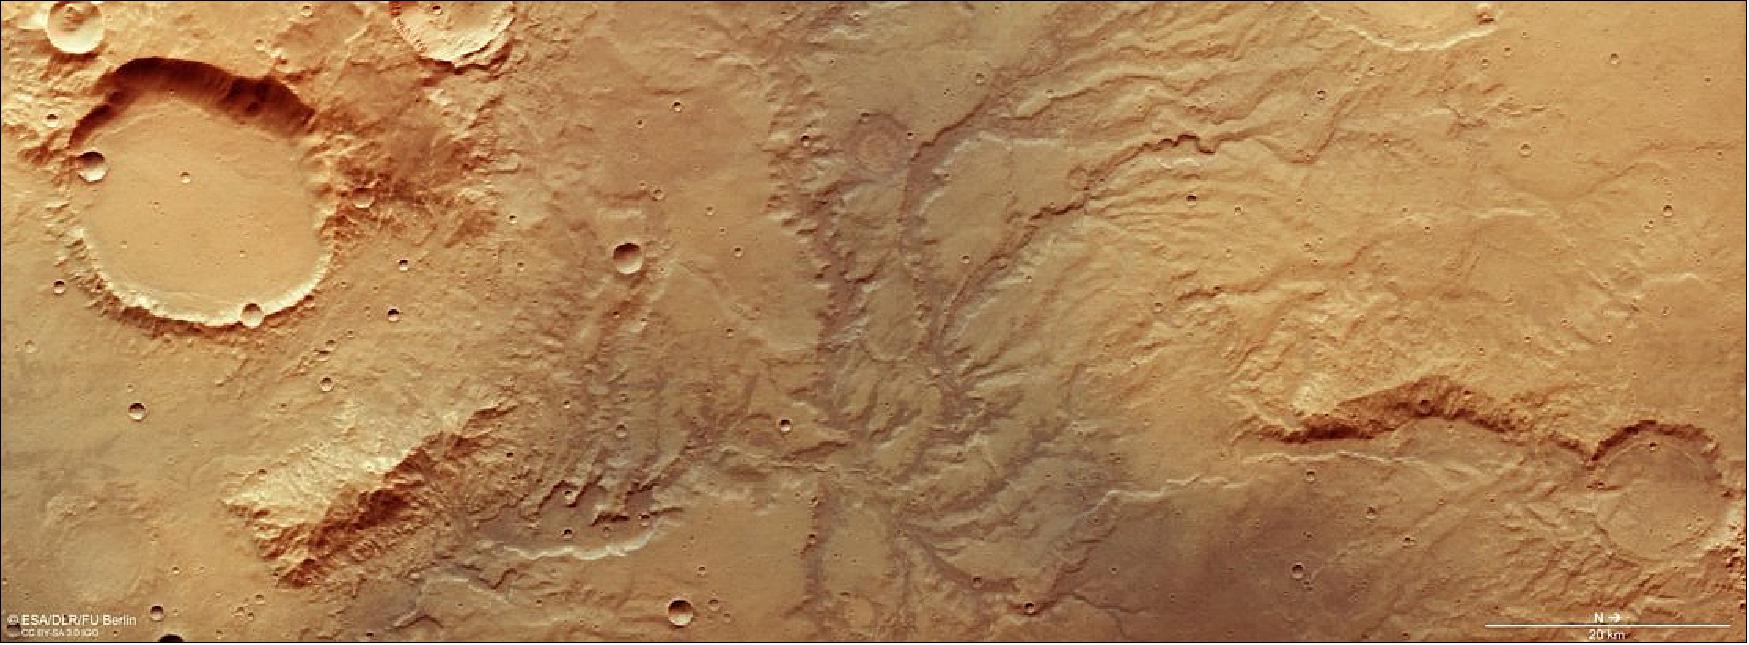 Figure 57: This image from ESA’s Mars Express shows a network of dried-up valleys on Mars, and comprises data gathered on 19 November 2018 during Mars Express orbit 18831. The ground resolution is approximately 14 m/pixel and the images are centered at 66ºE/17ºS. This image was created using data from the nadir and color channels of the High Resolution Stereo Camera (HRSC). The nadir channel is aligned perpendicular to the surface of Mars, as if looking straight down at the surface. North is to the right (image credit: ESA/DLR/FU Berlin, CC BY-SA 3.0 IGO)